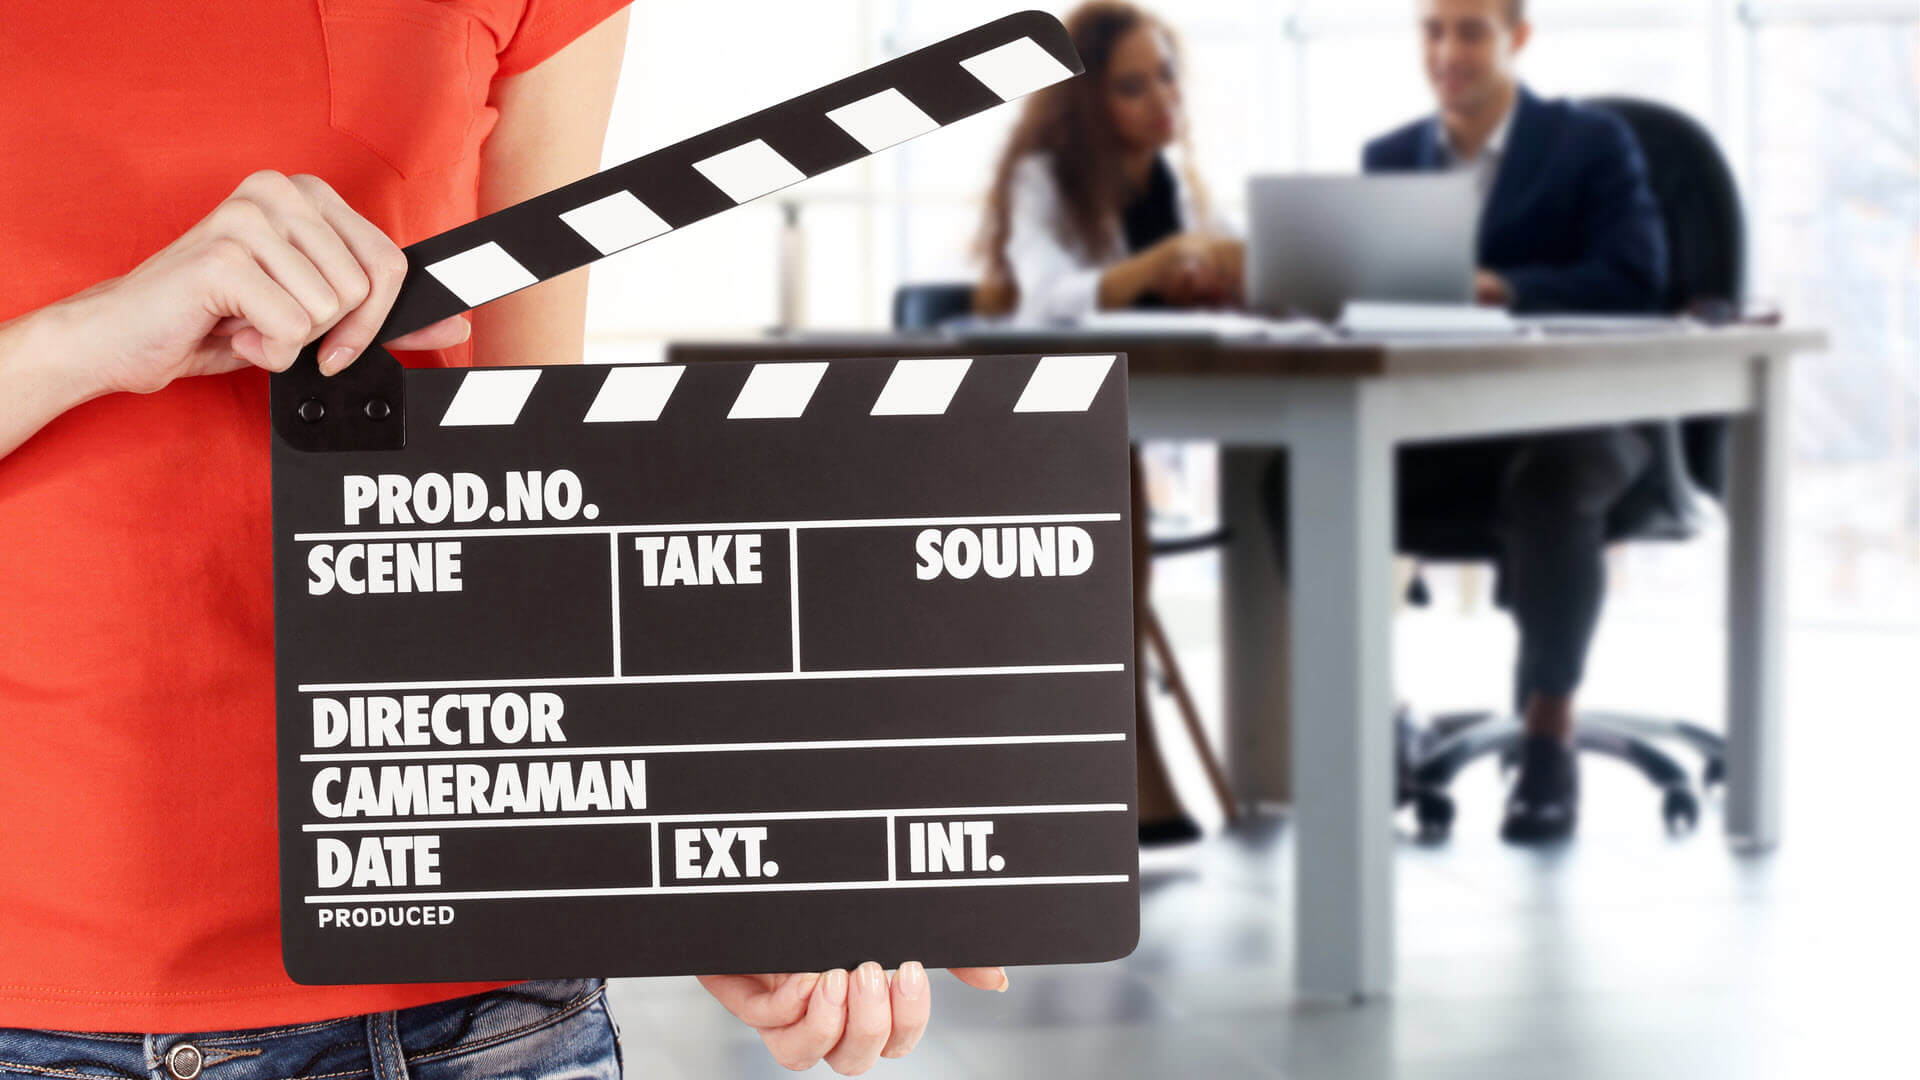 Is your organization ready to take the plunge into in-house video production?